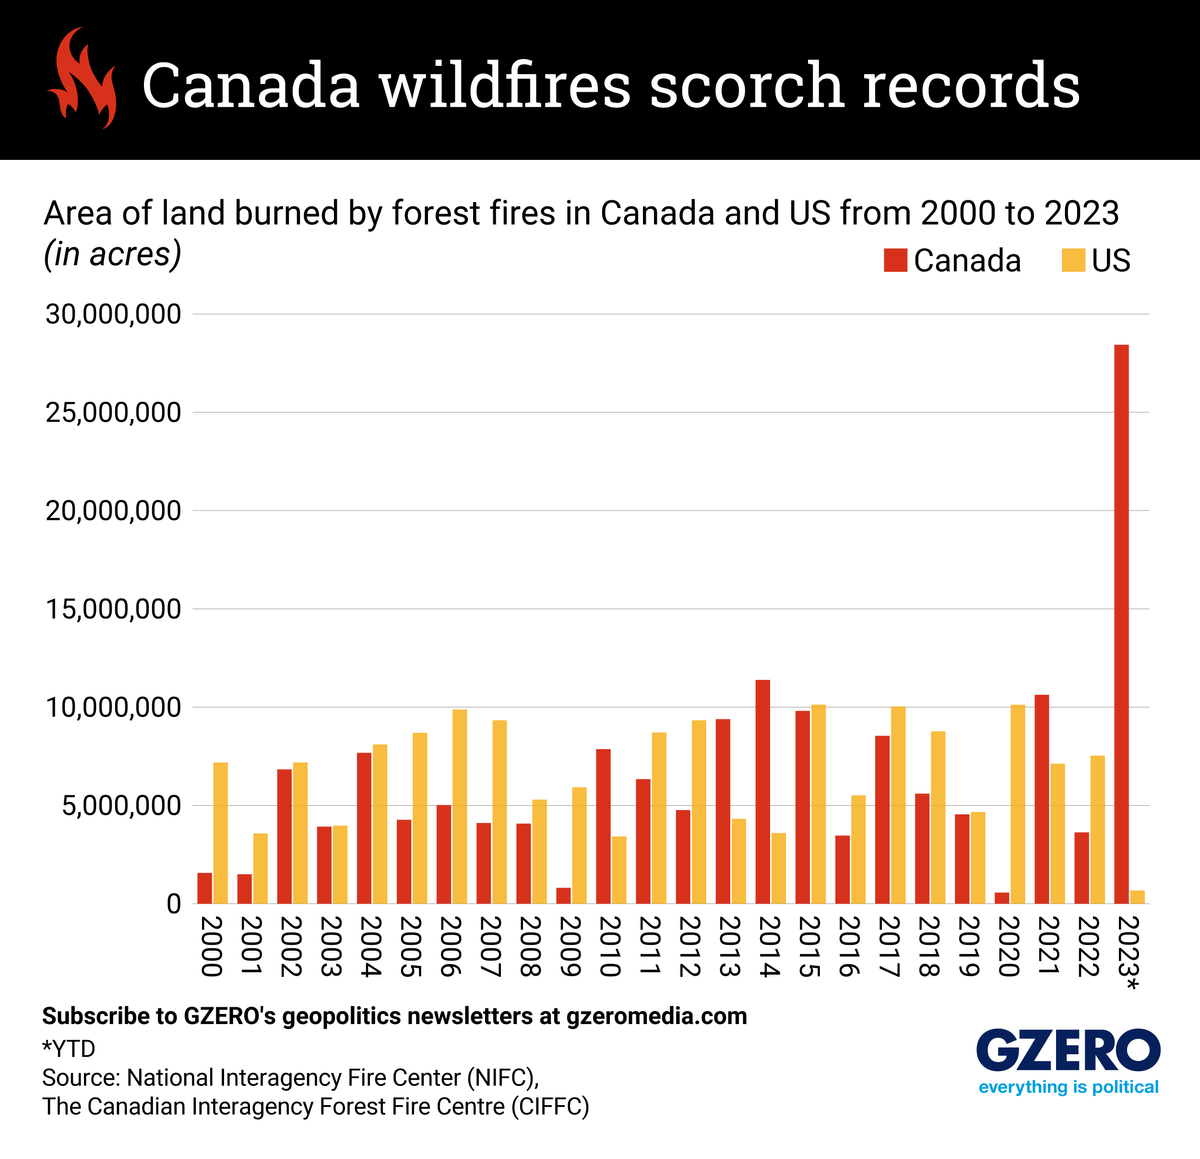 Timeline showing area of land burned by wildfires in the US and Canada per year